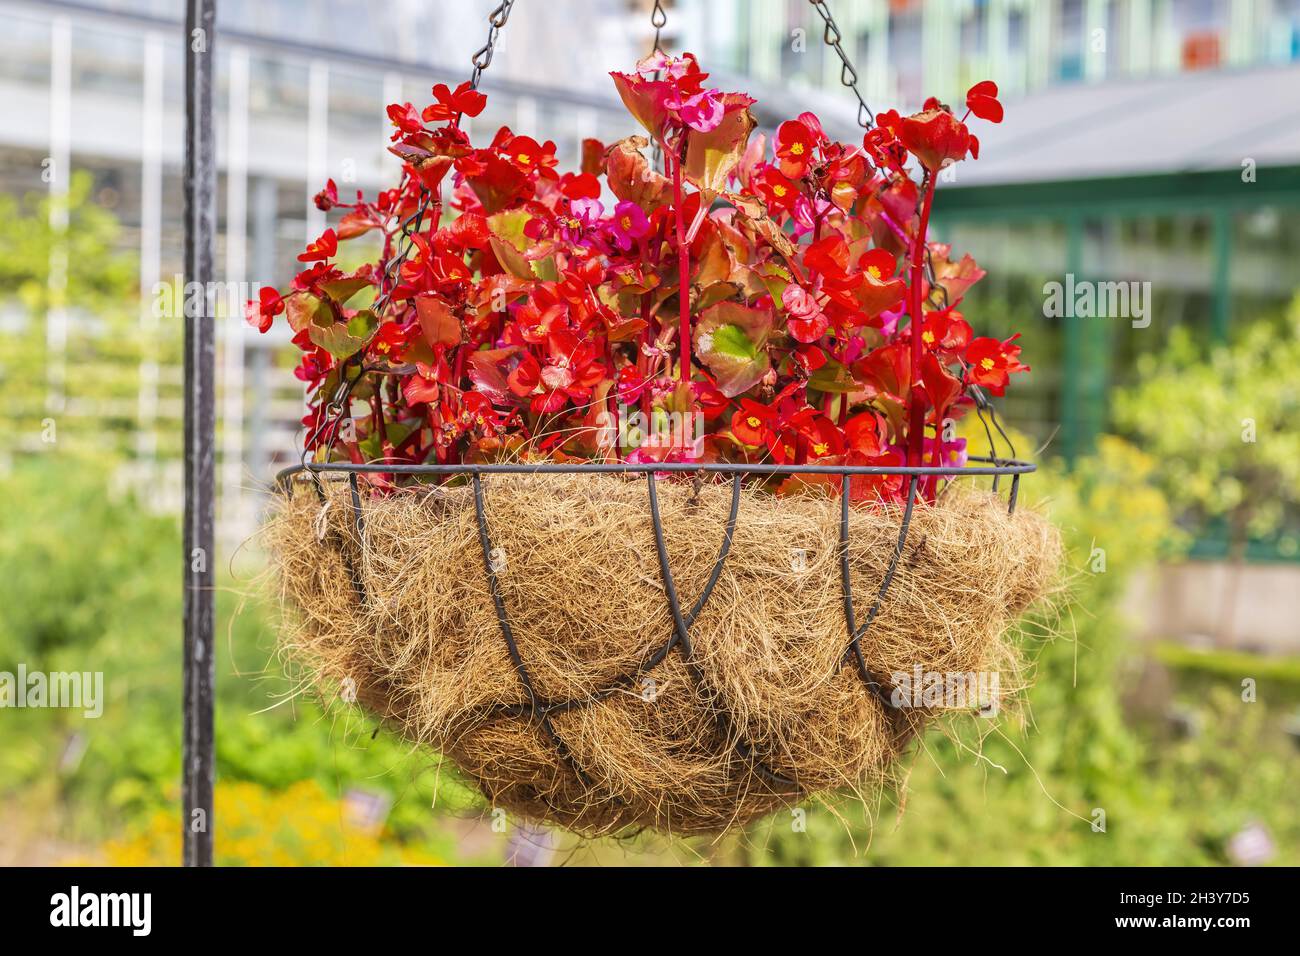 Flowerpot with bright red begonia hanging in the garden Stock Photo